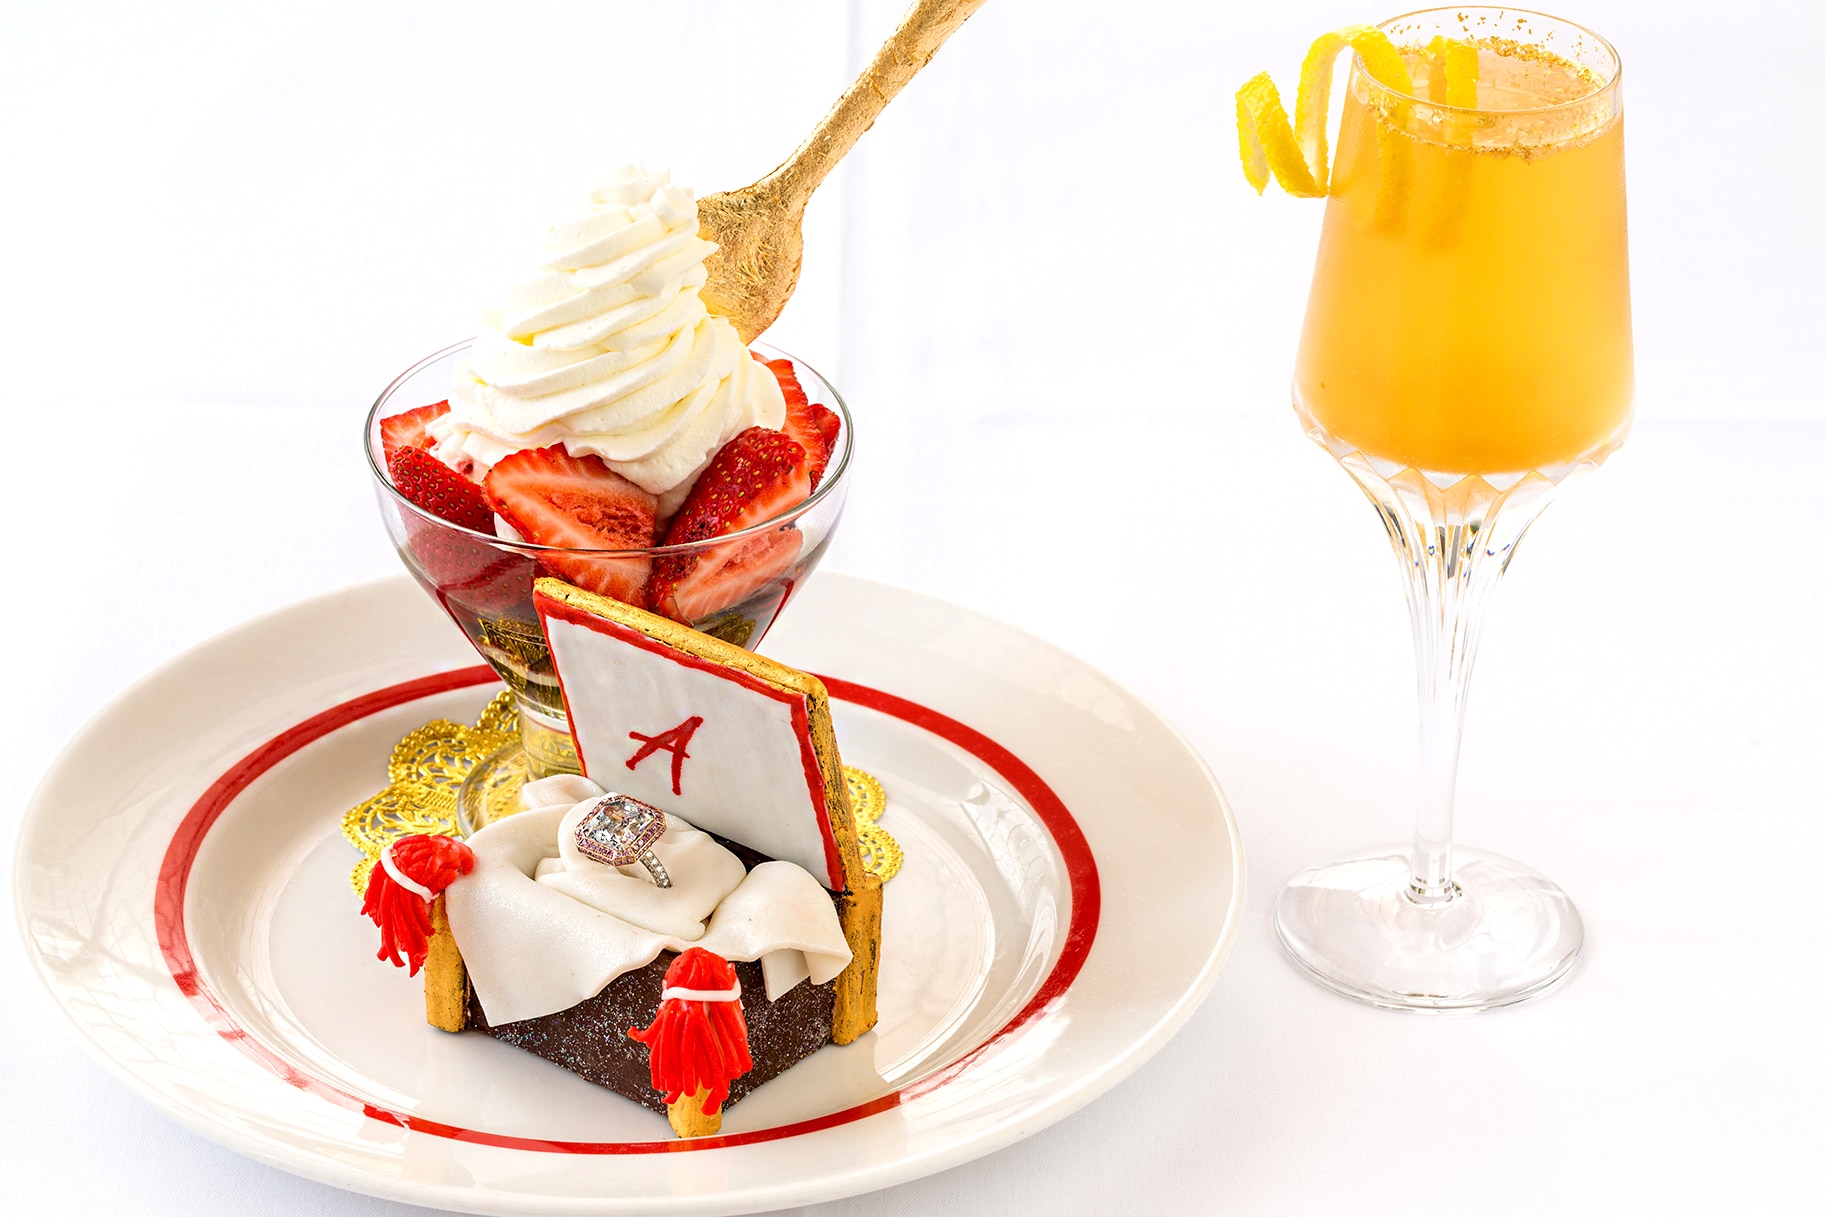 Most Expensive Desserts in the world